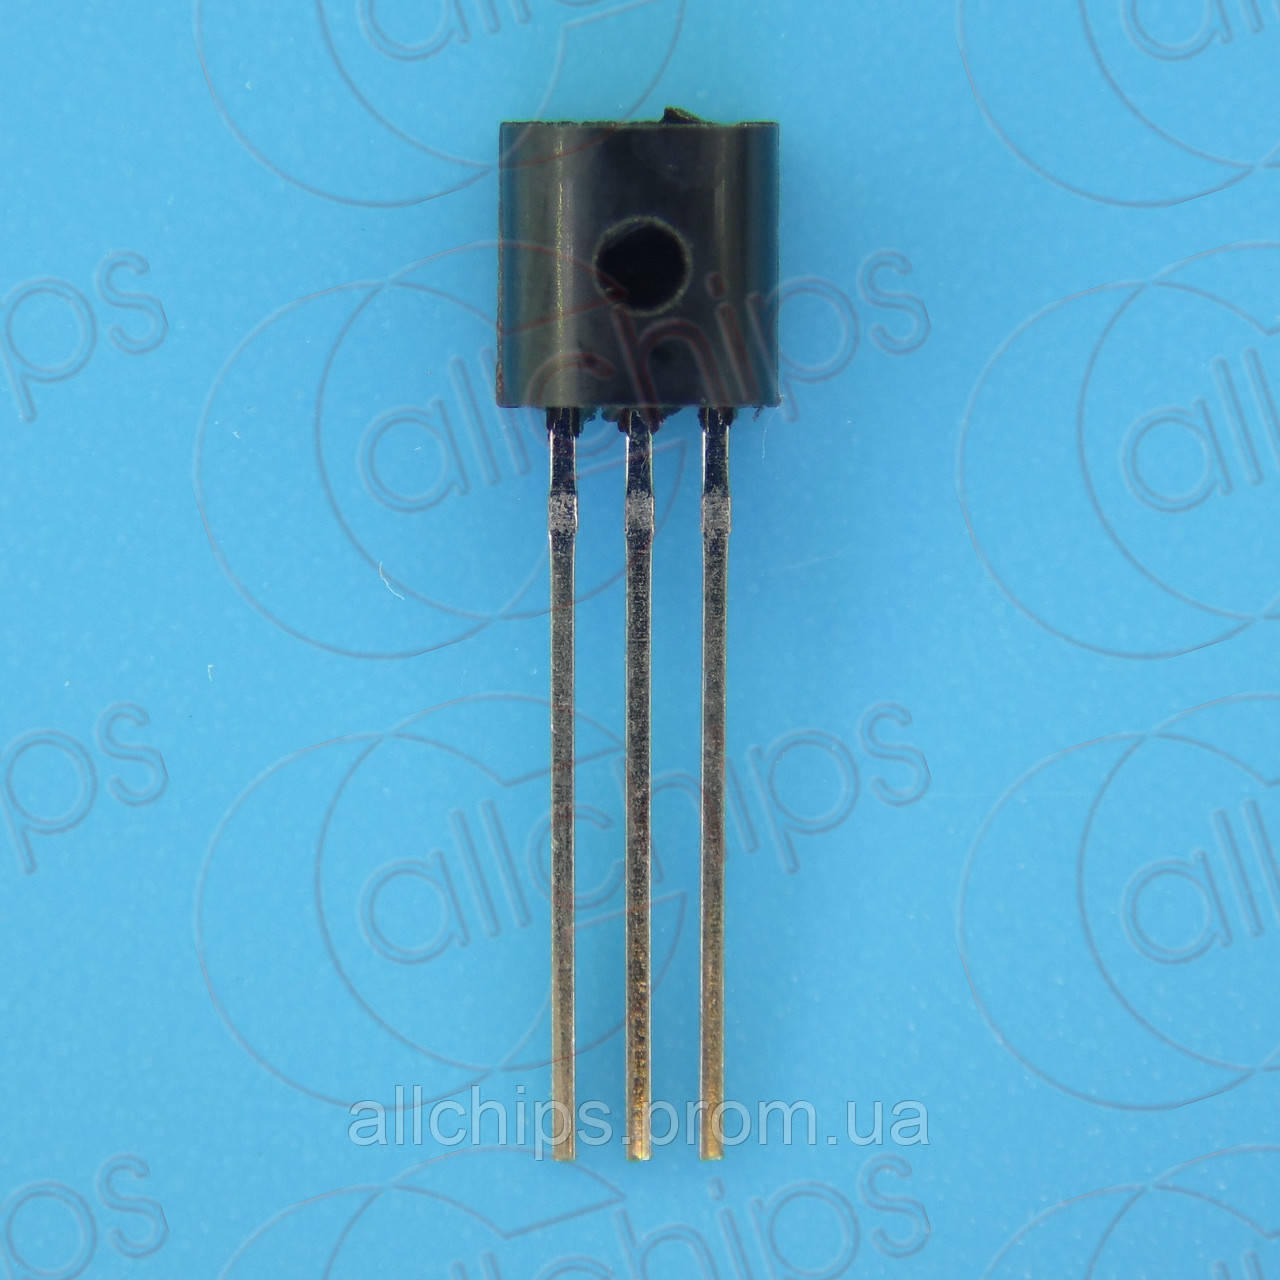 MOSFET N-канала 50В 10мА Toshiba 2SK246 TO92 - фото 3 - id-p1388499017